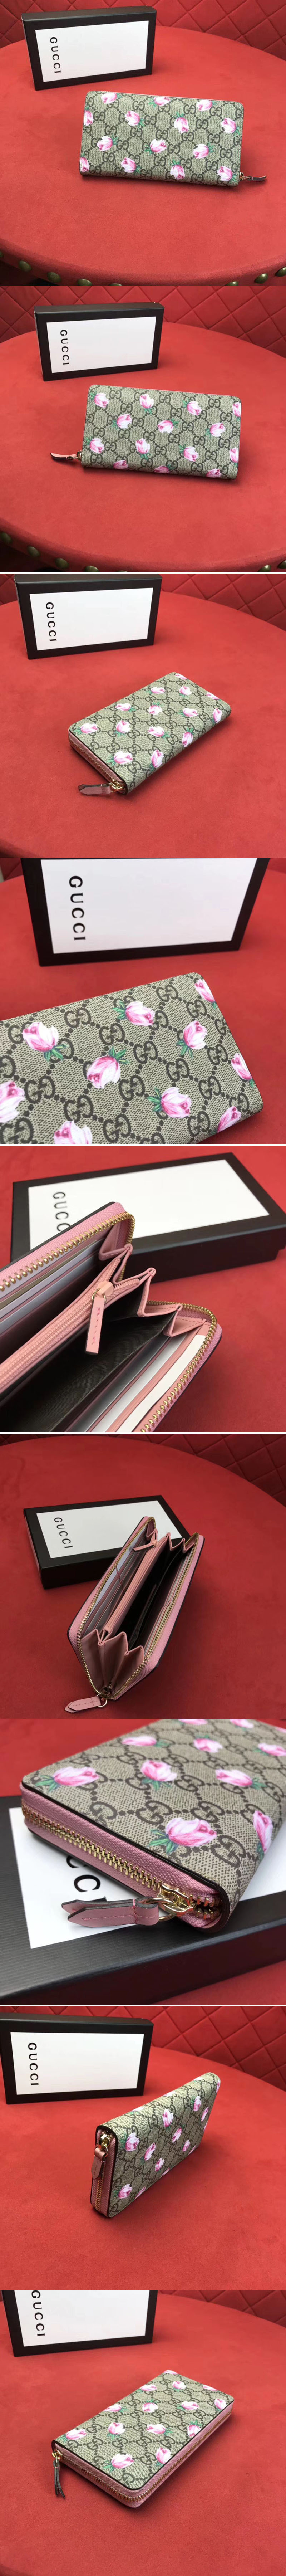 Replica Gucci 408667 GG Canvas With Calfskin Leather Rose Printed Wallet